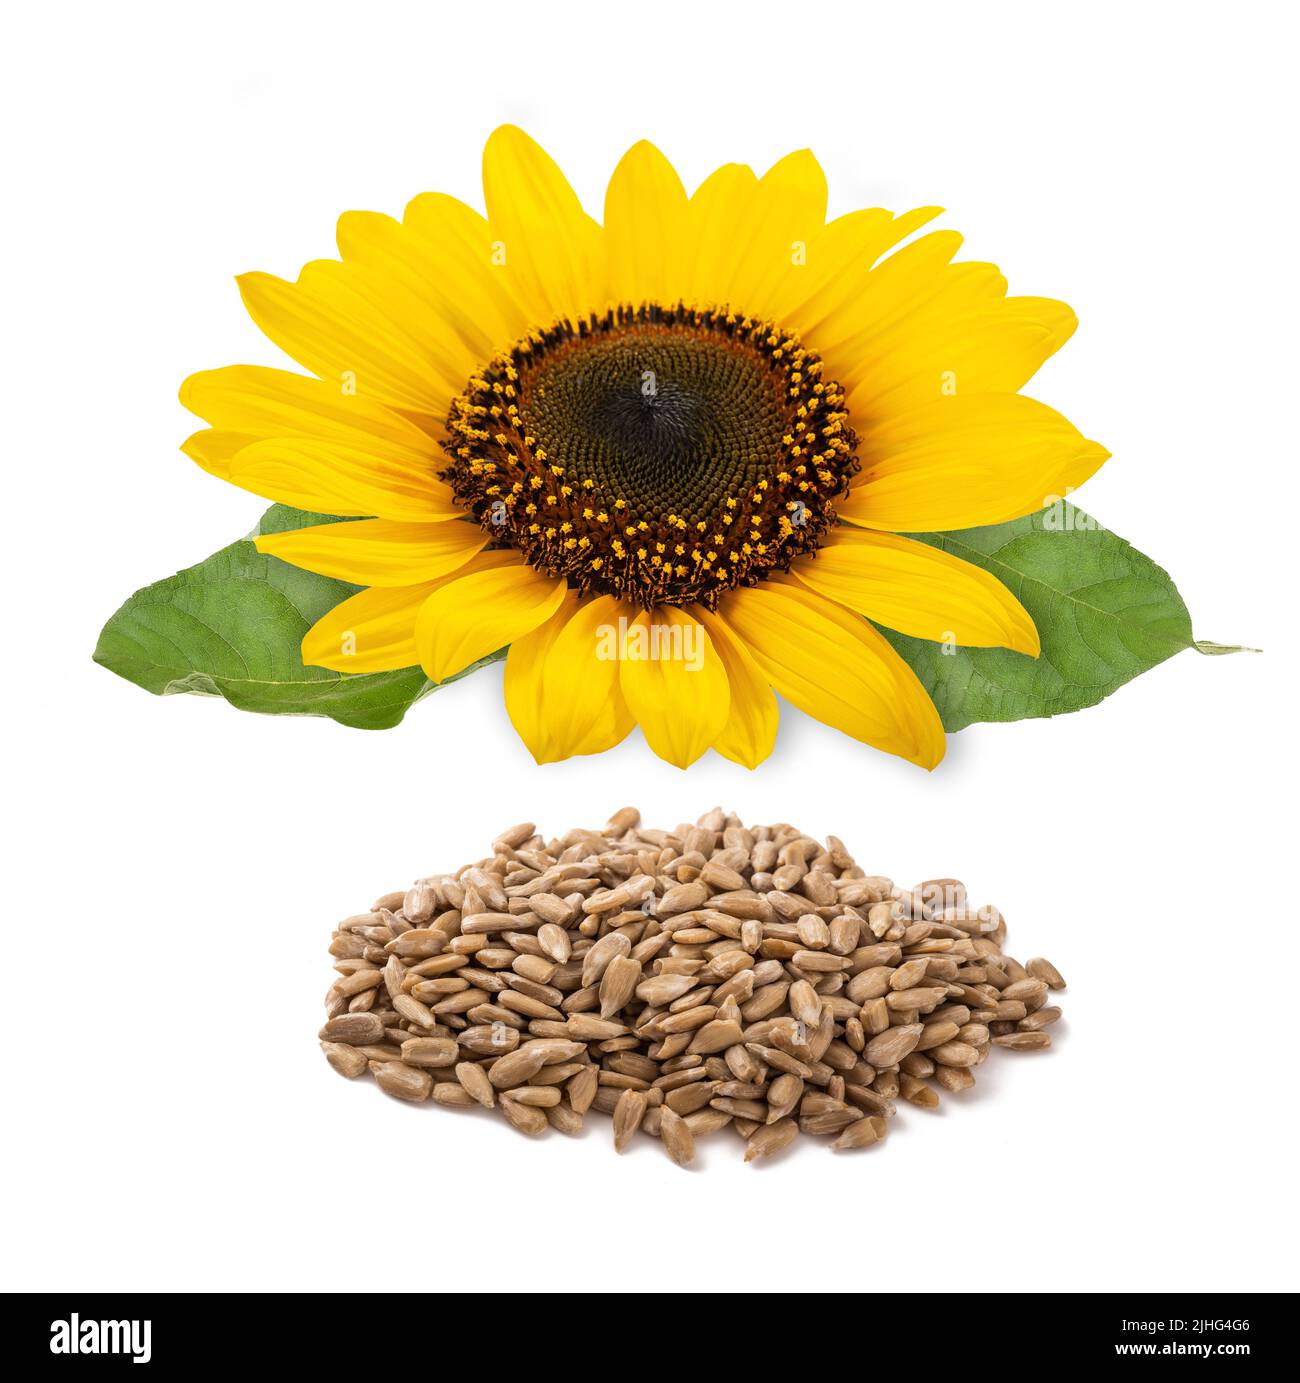 Sunflower flower and  seeds heap isolated on white background Stock Photo